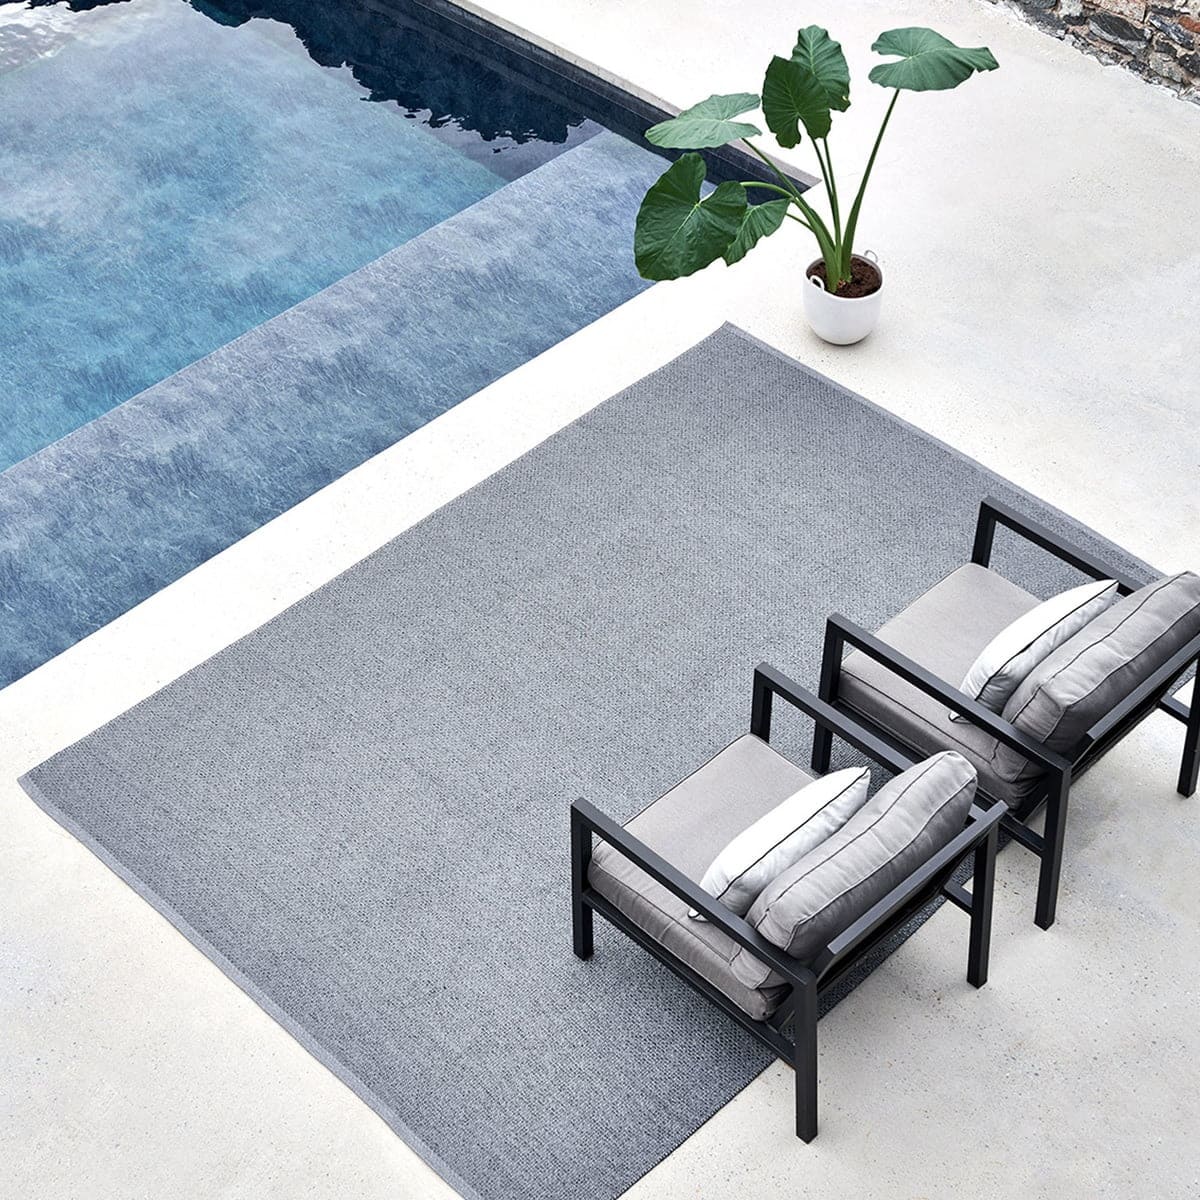 How To Install Outdoor Carpet On Concrete